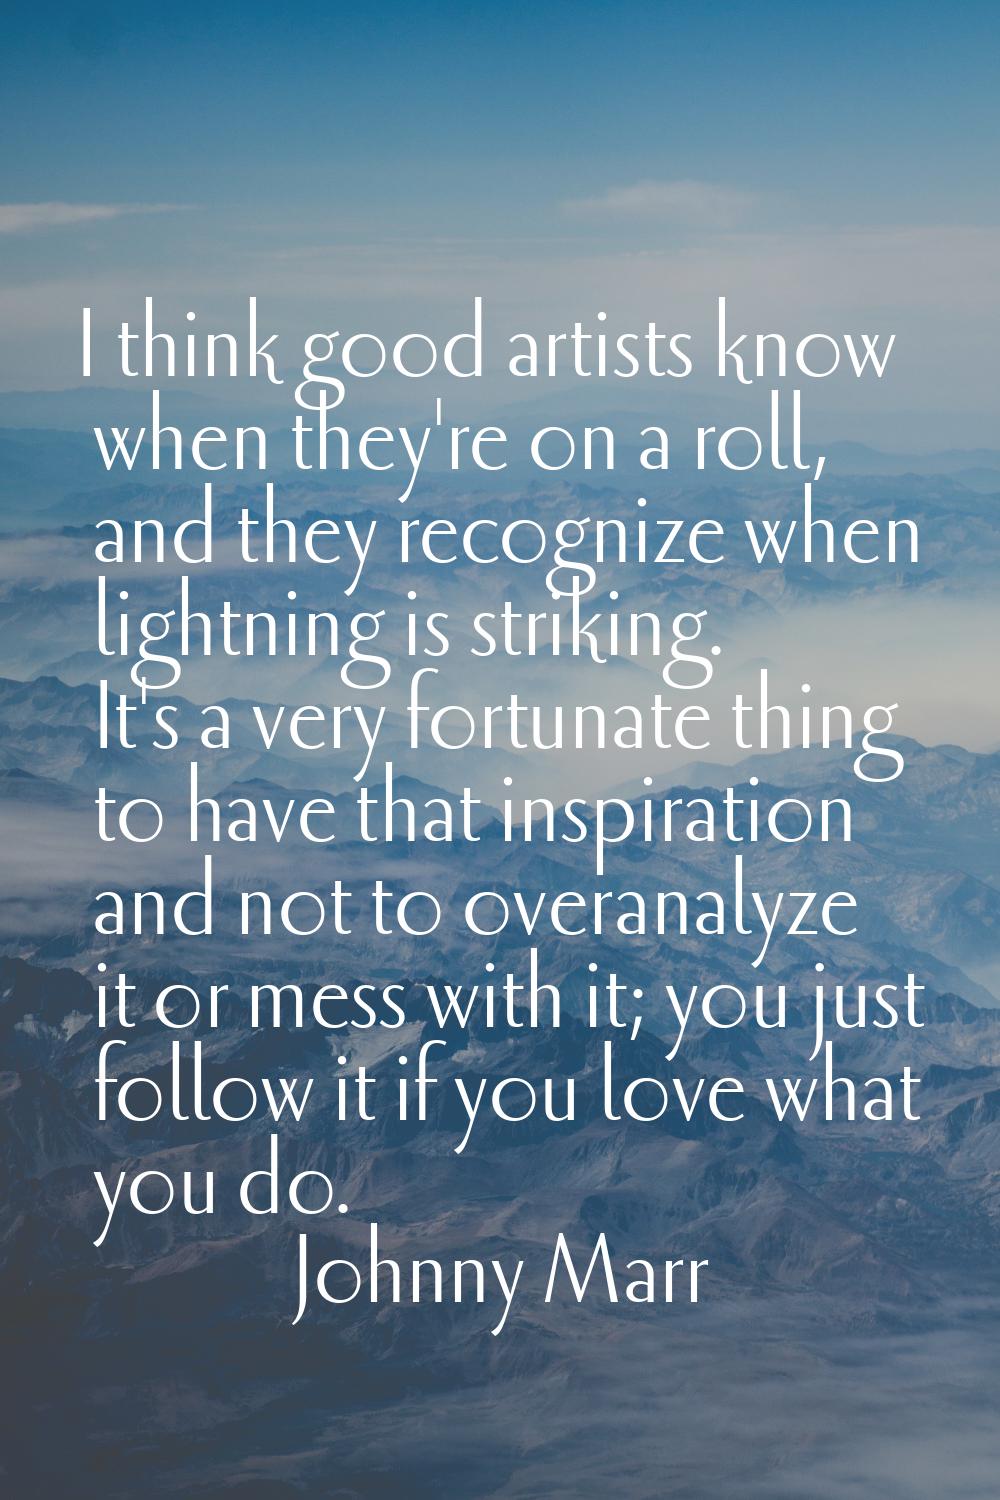 I think good artists know when they're on a roll, and they recognize when lightning is striking. It